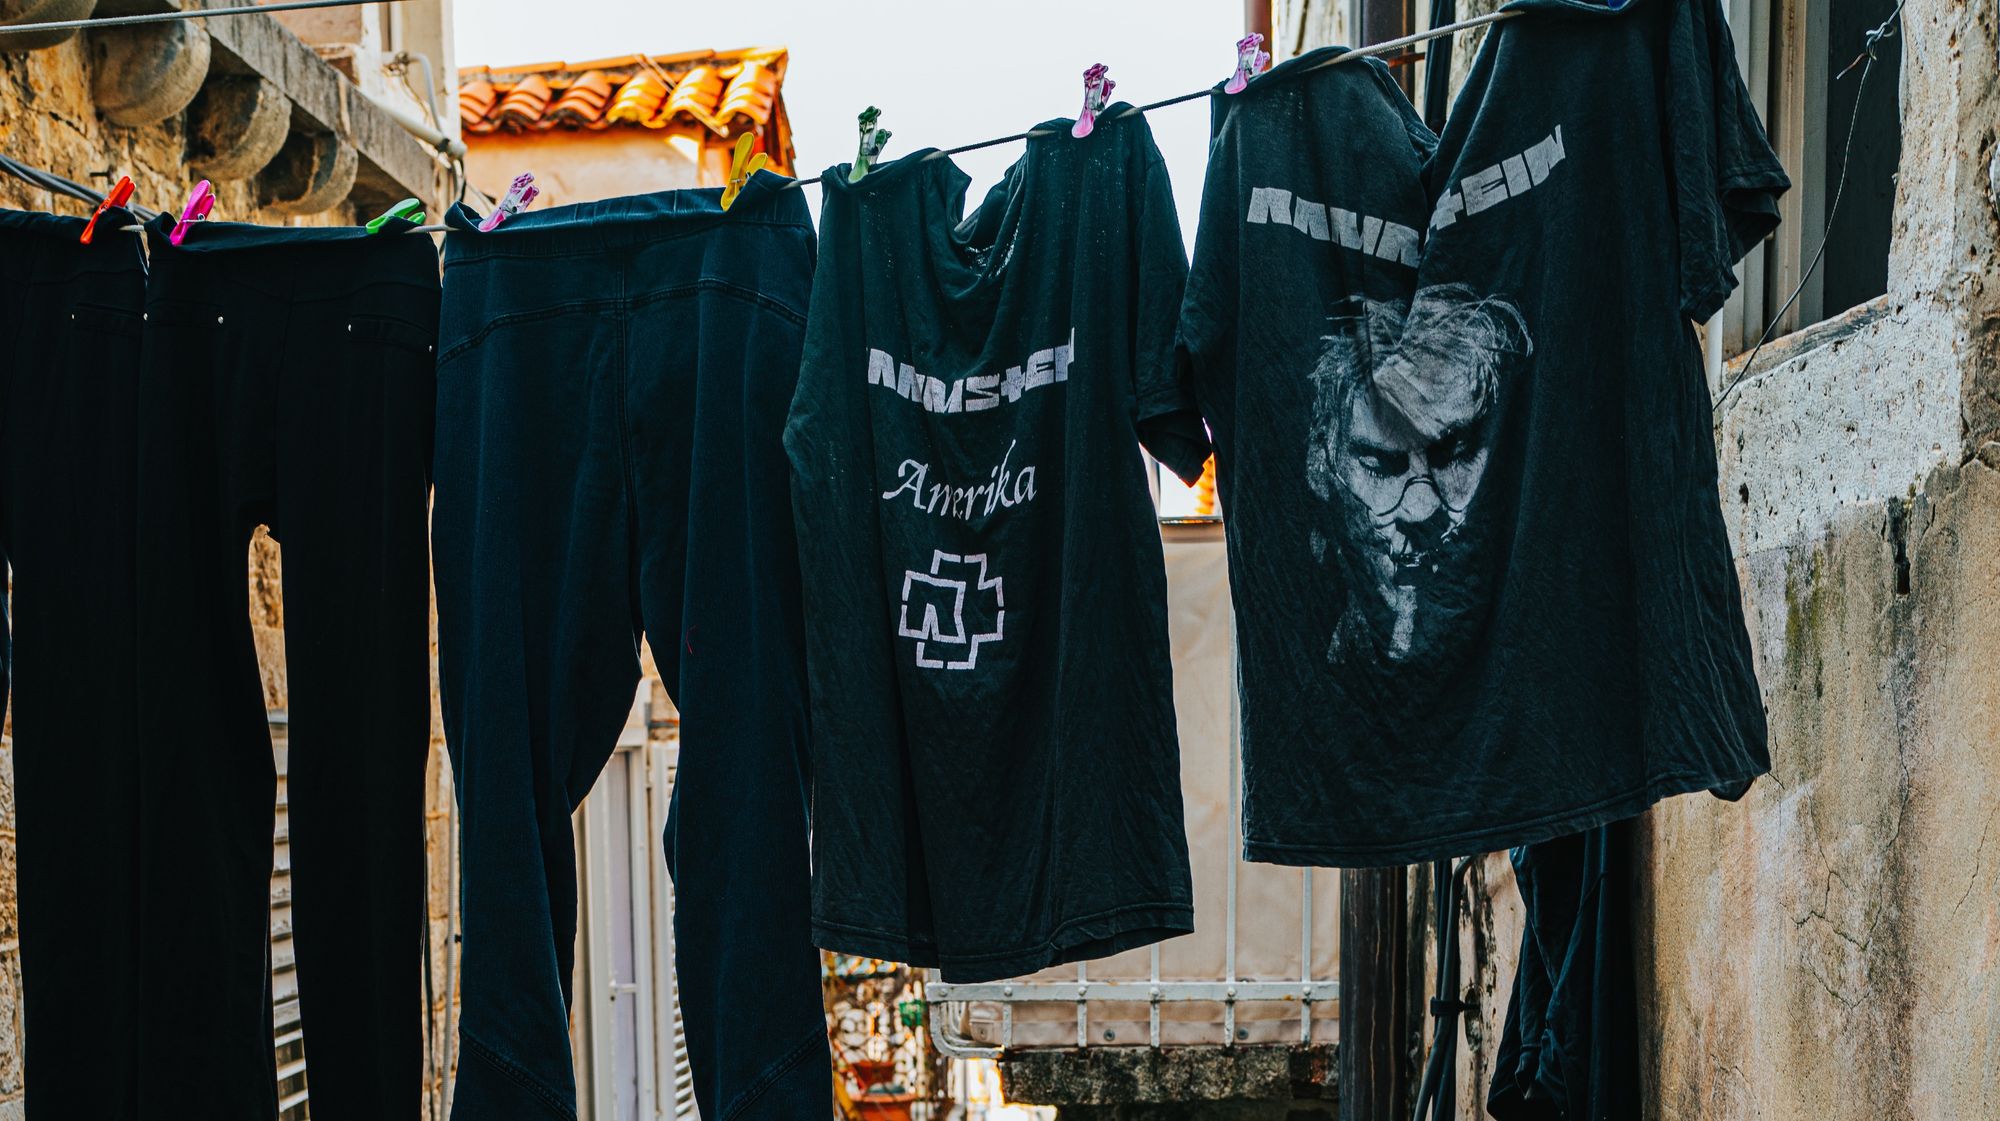 Two Rammstein t-shirts hanging to dry